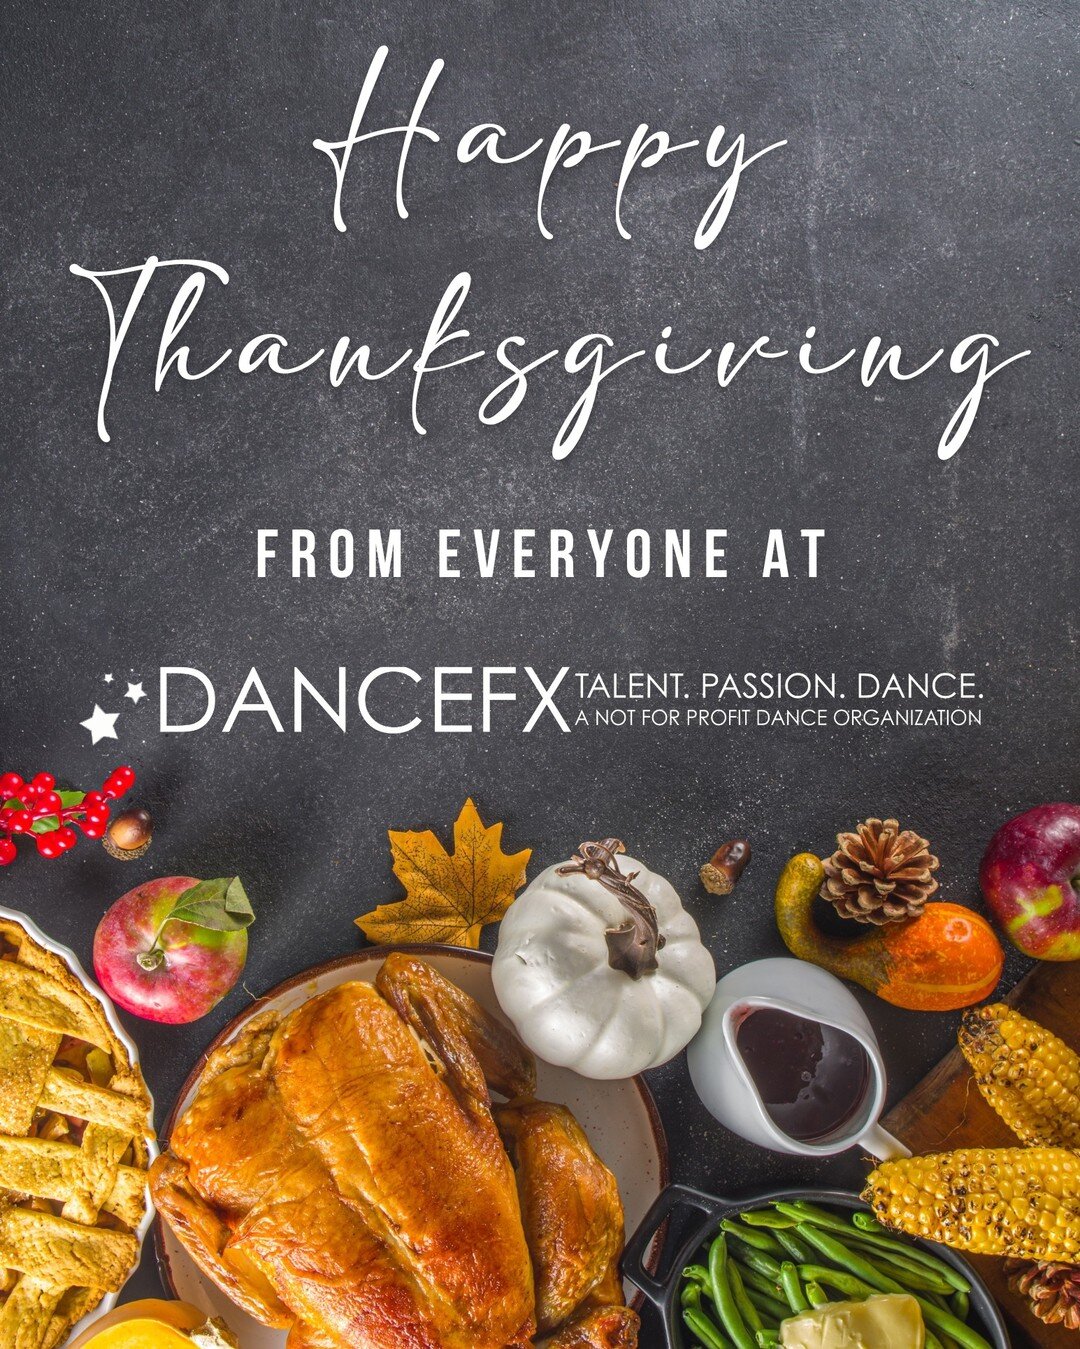 Dancefx Atlanta is forever grateful for our students, families, and staff. From our family to yours, we wish everyone a Happy Thanksgiving. If you don't celebrate Thanksgiving, we hope you are having a restful week. We look forward to having you all 